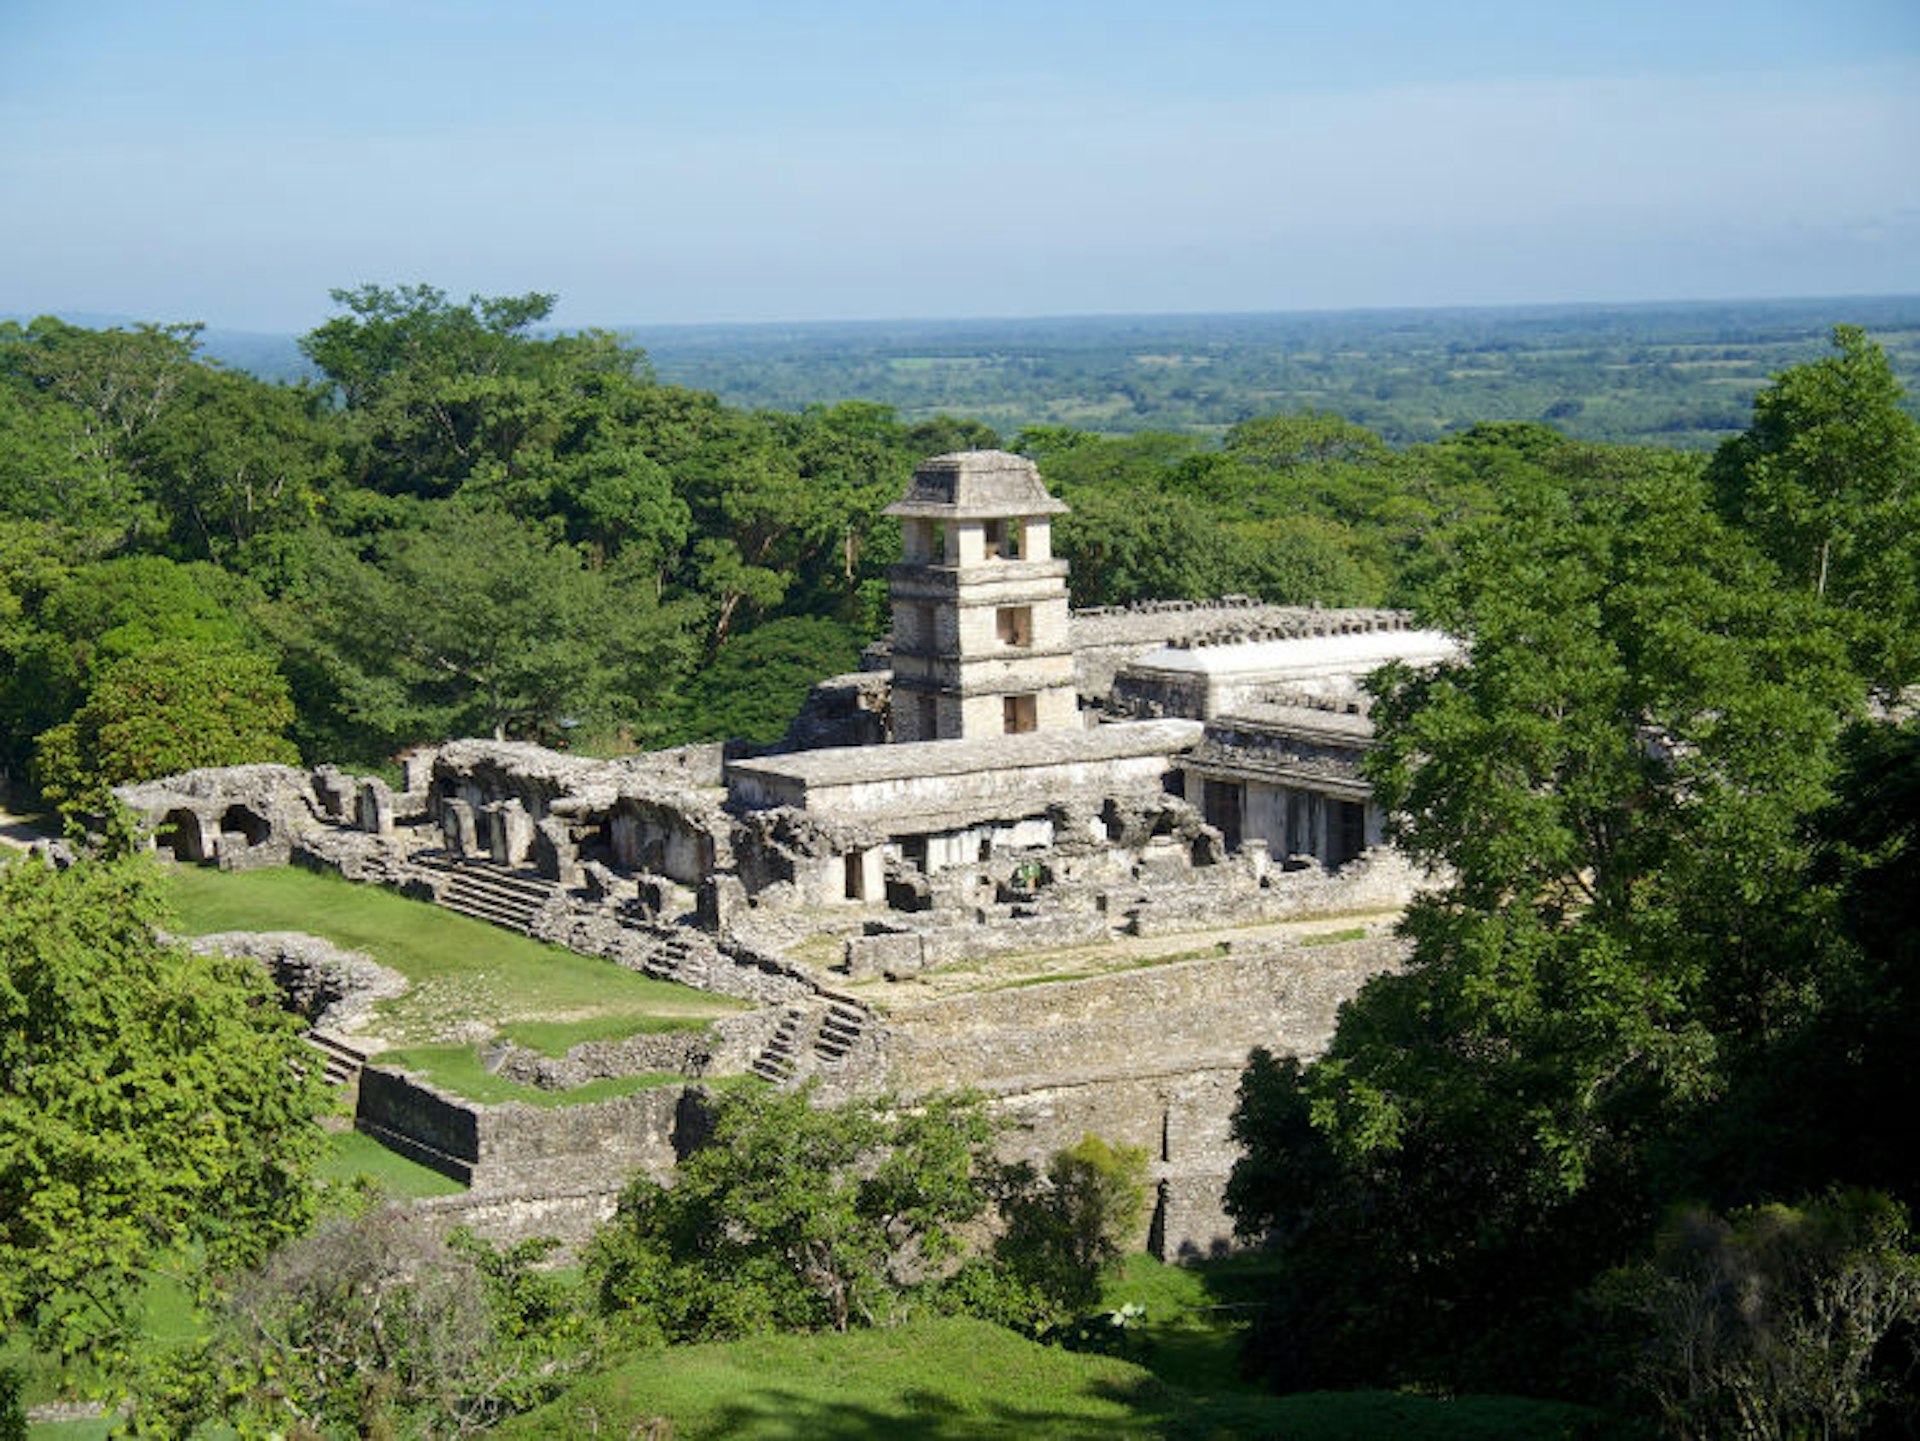 Palenque's jungle setting adds to its appeal. Image by Laurent de Walick / CC BY 2.0